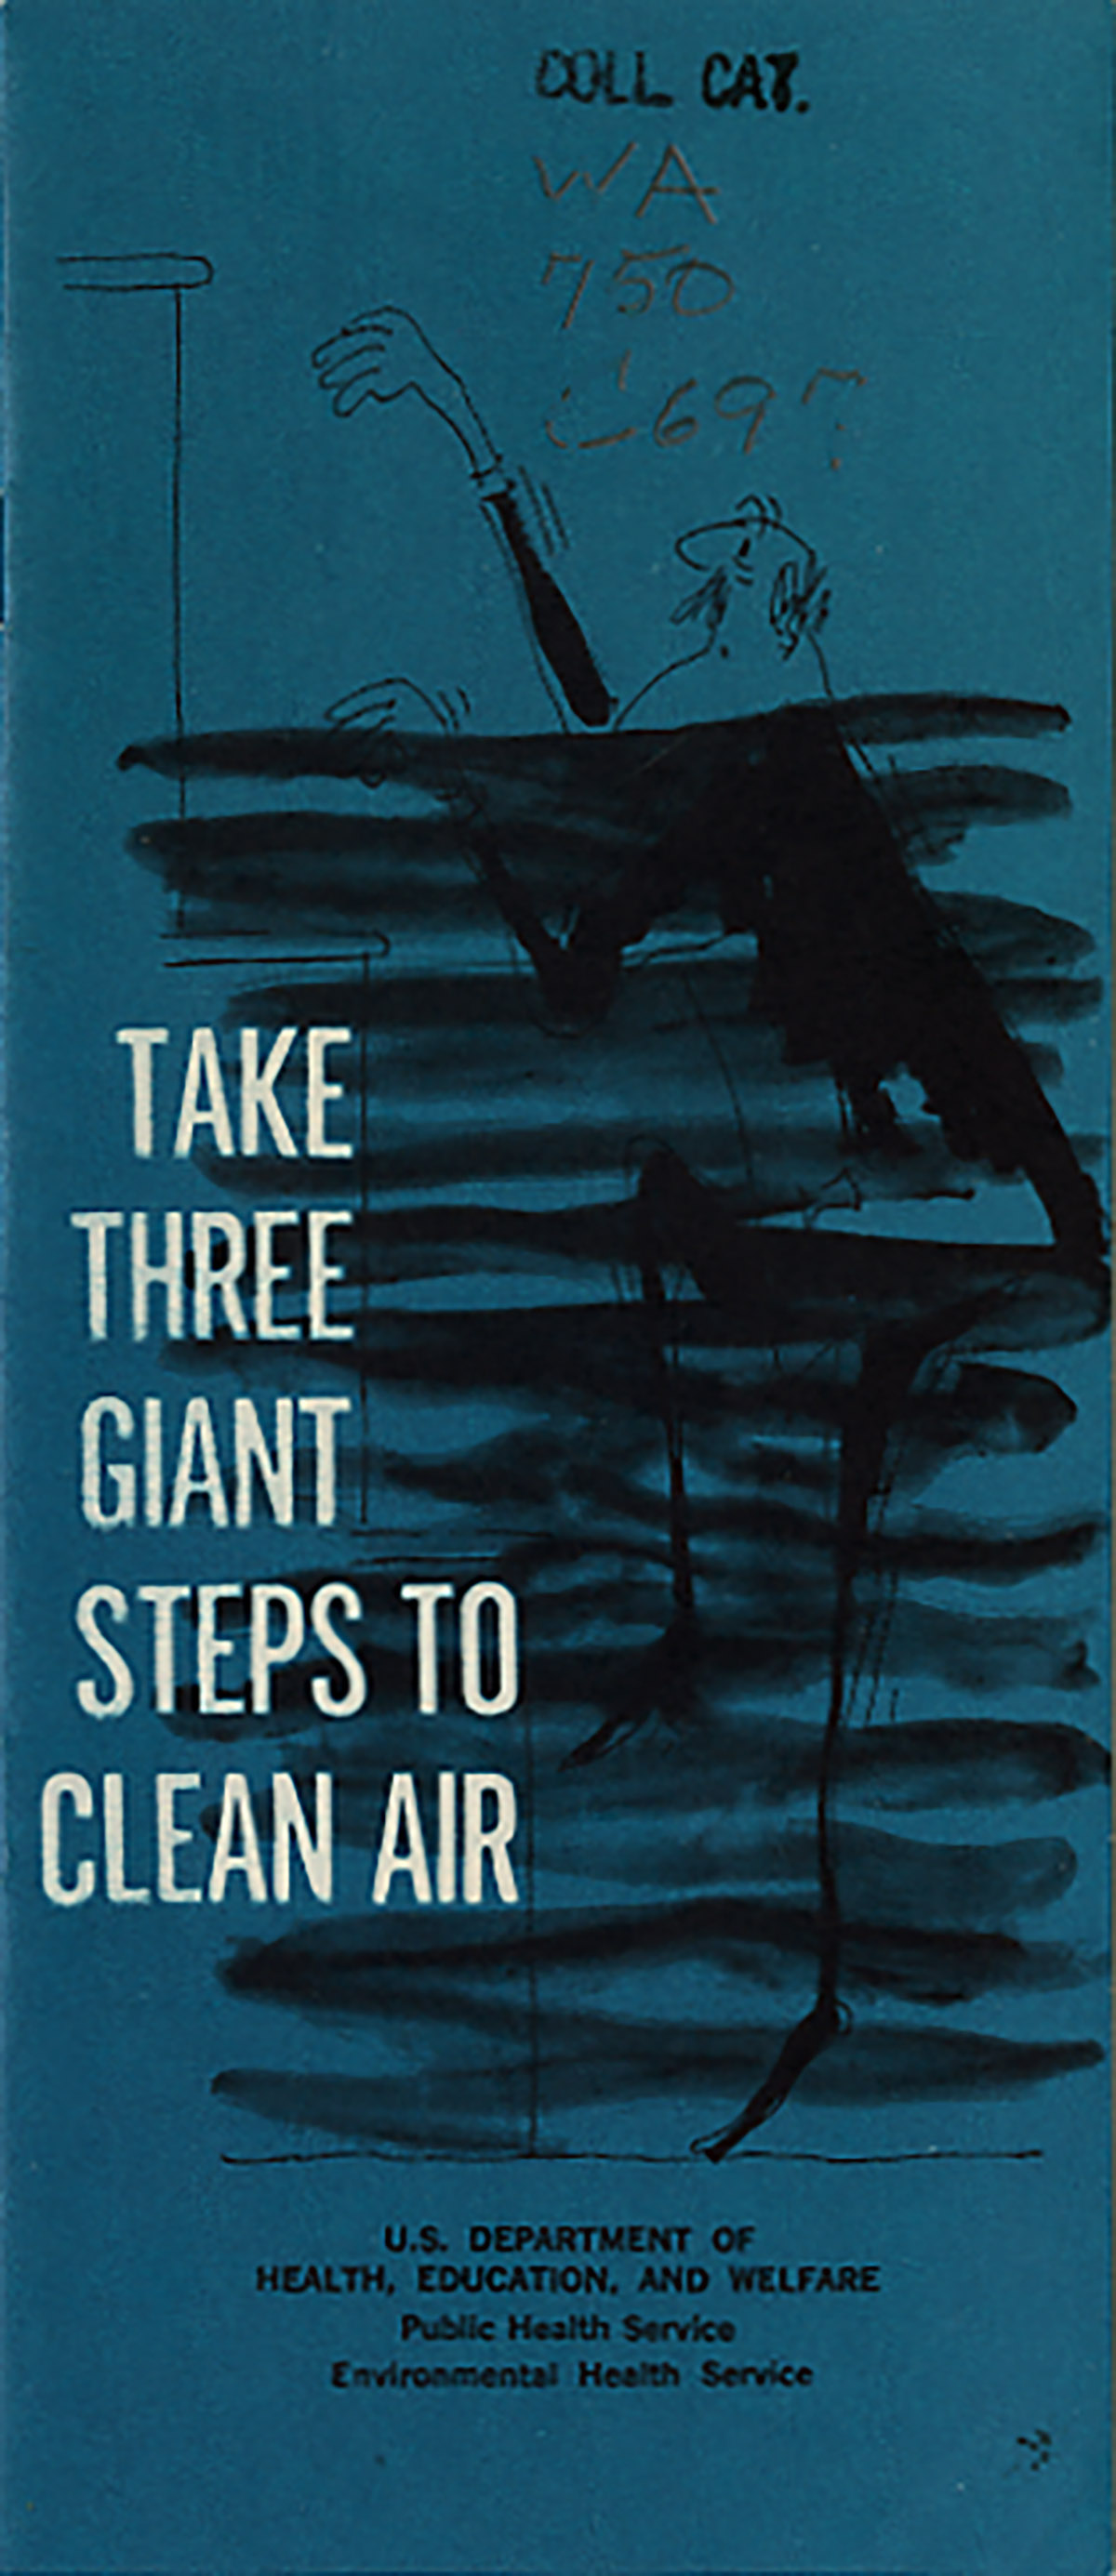 A pamphlet cover with an illustration of a man climbing steep steps while covered by smog below.